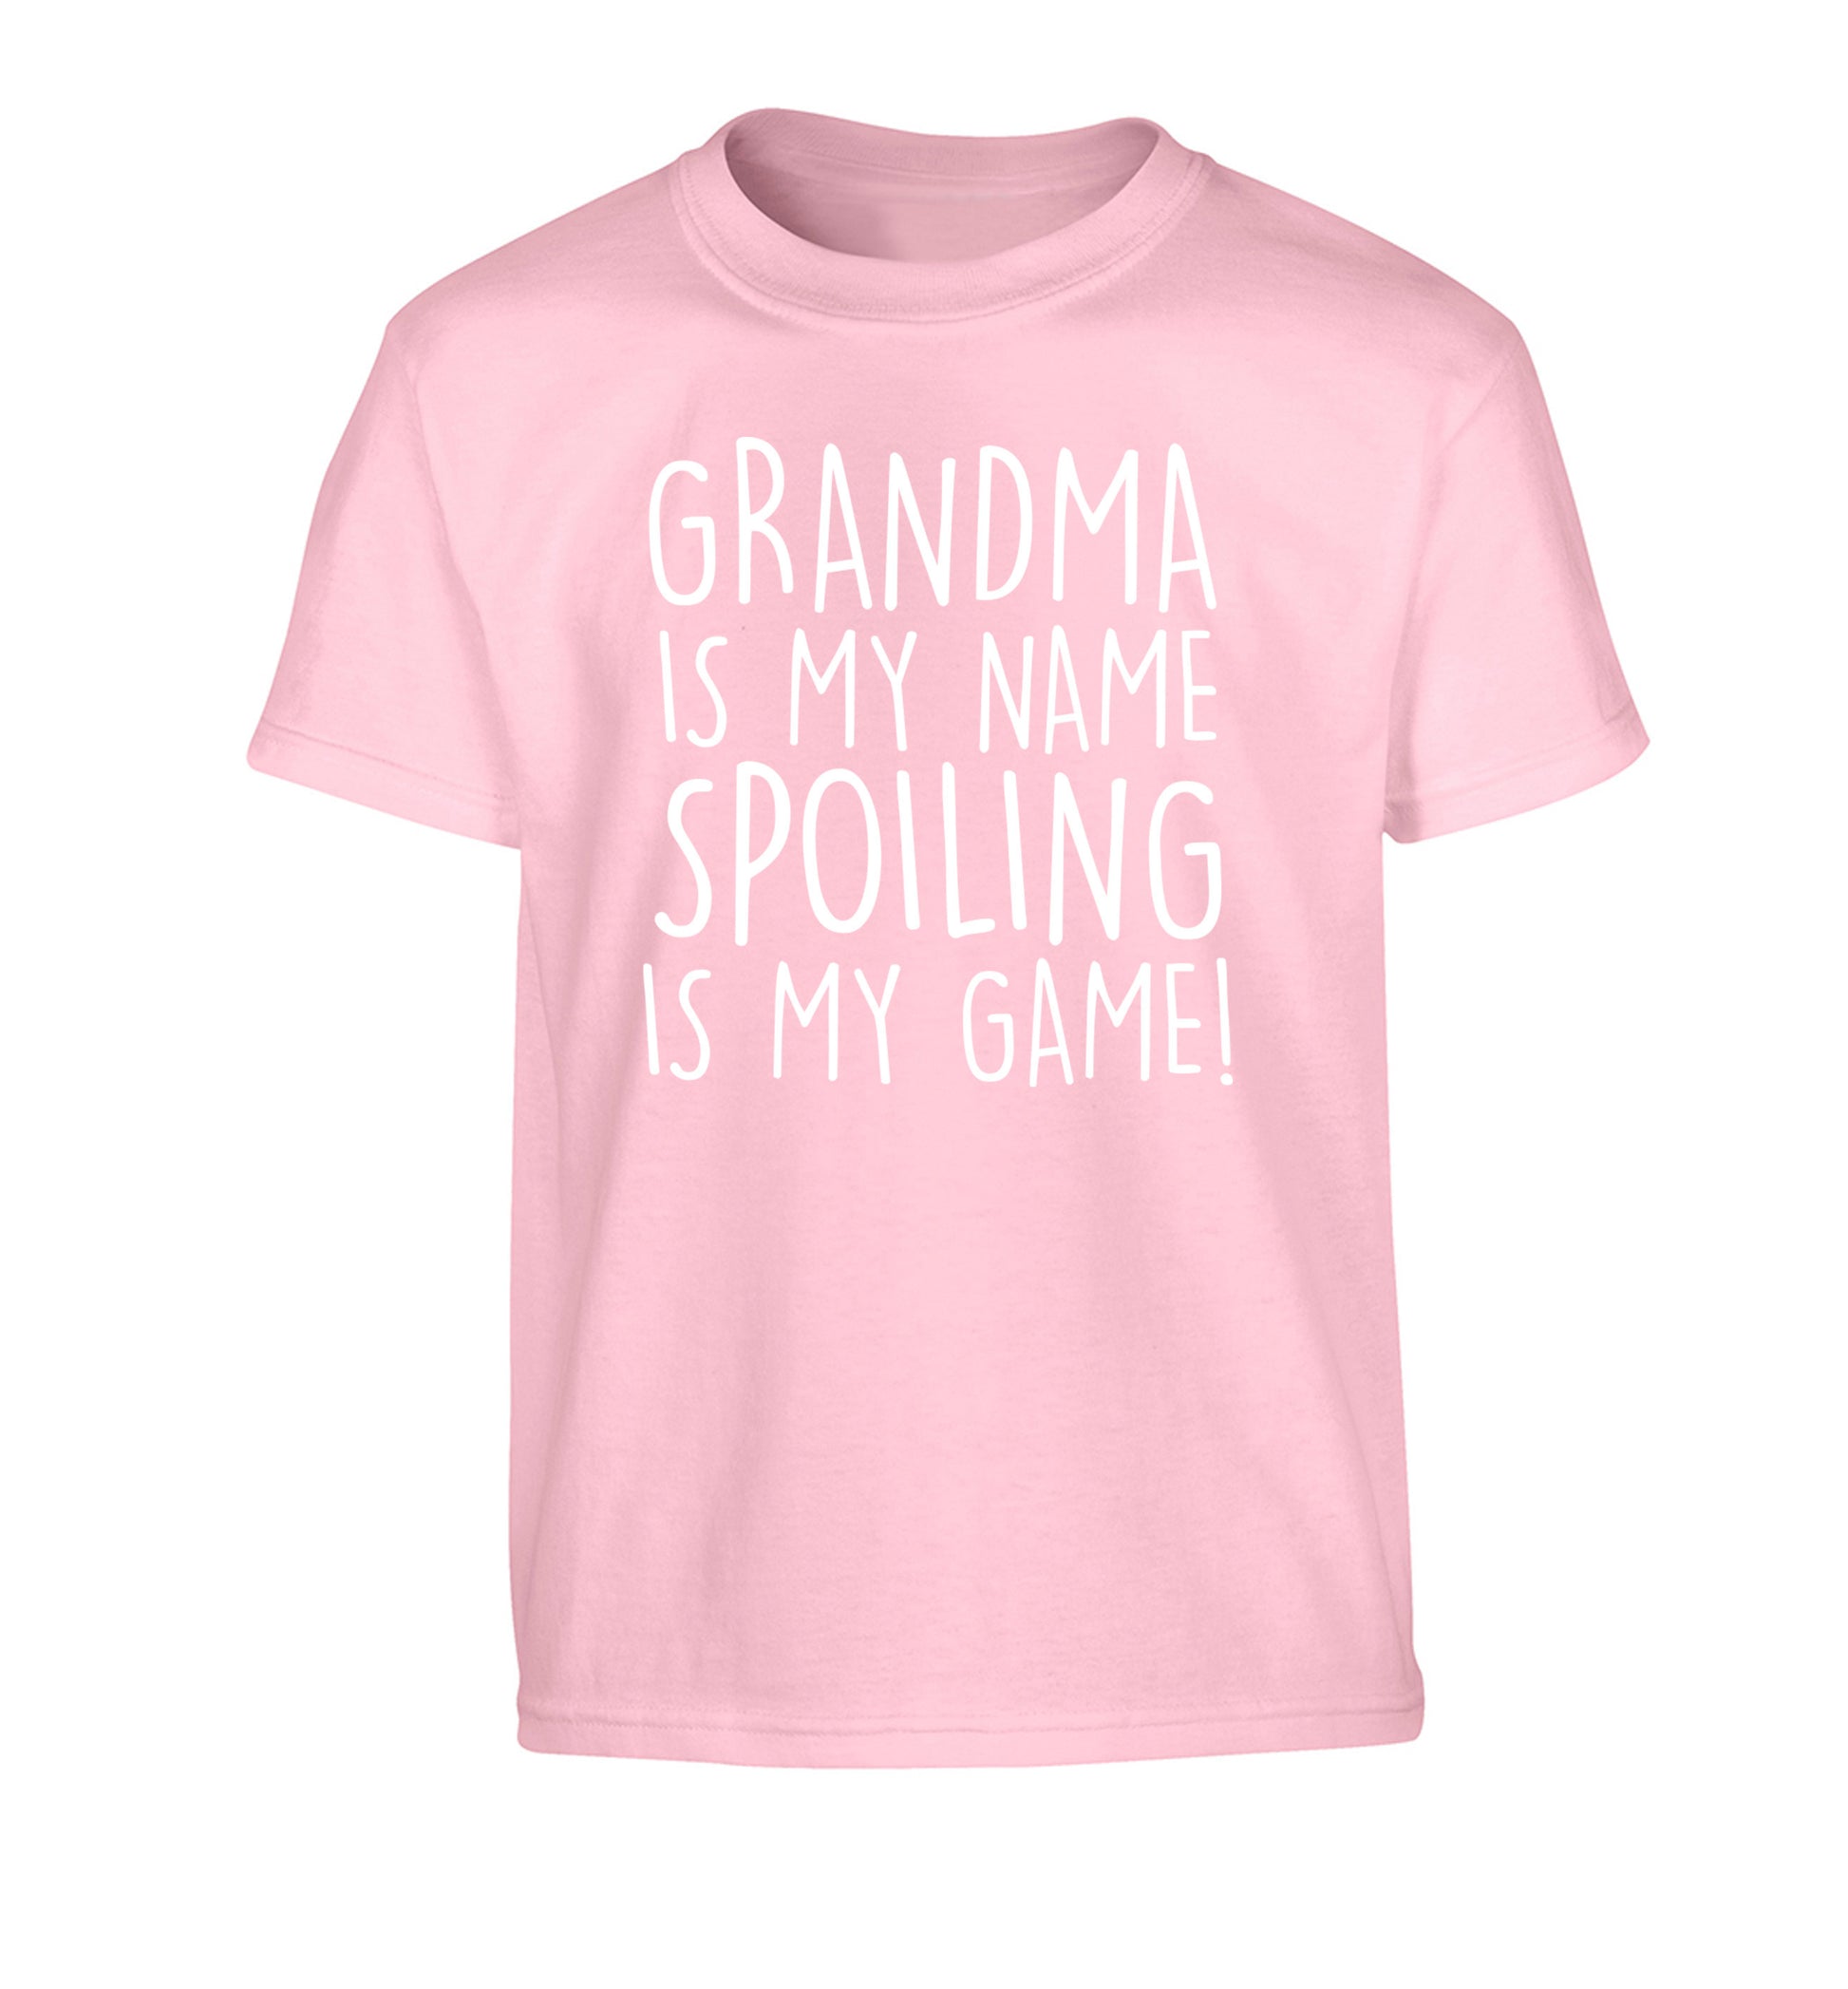 Grandma is my name, spoiling is my game Children's light pink Tshirt 12-14 Years